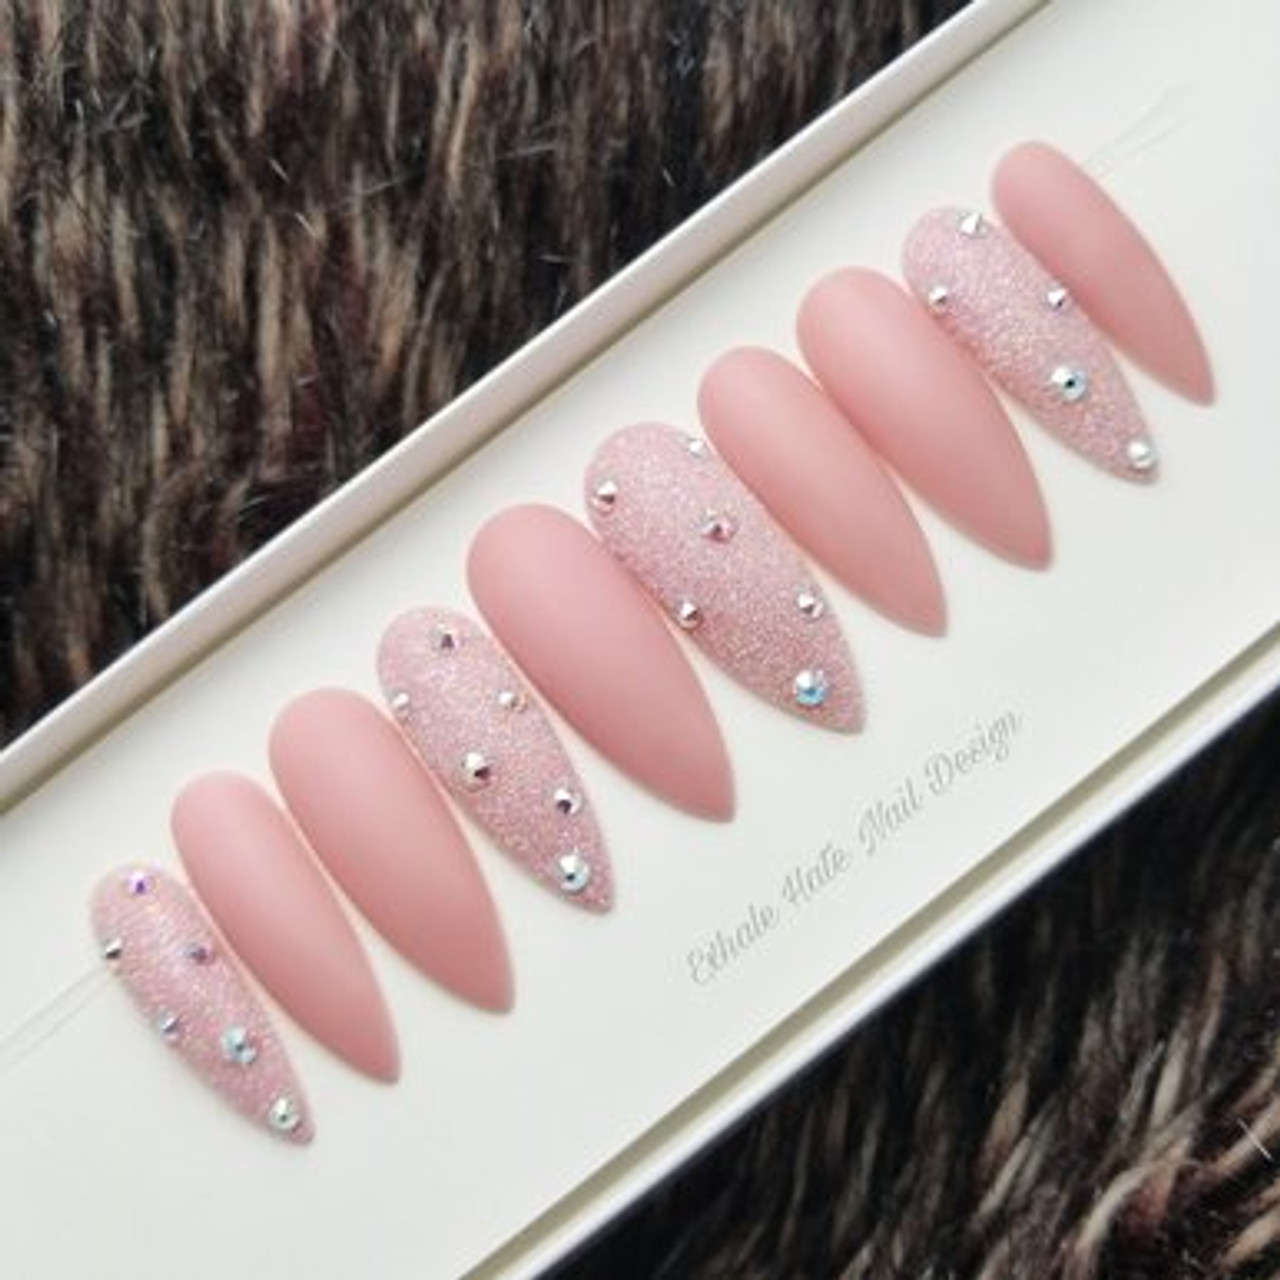 Nude matte with Swarovski crystals nail art